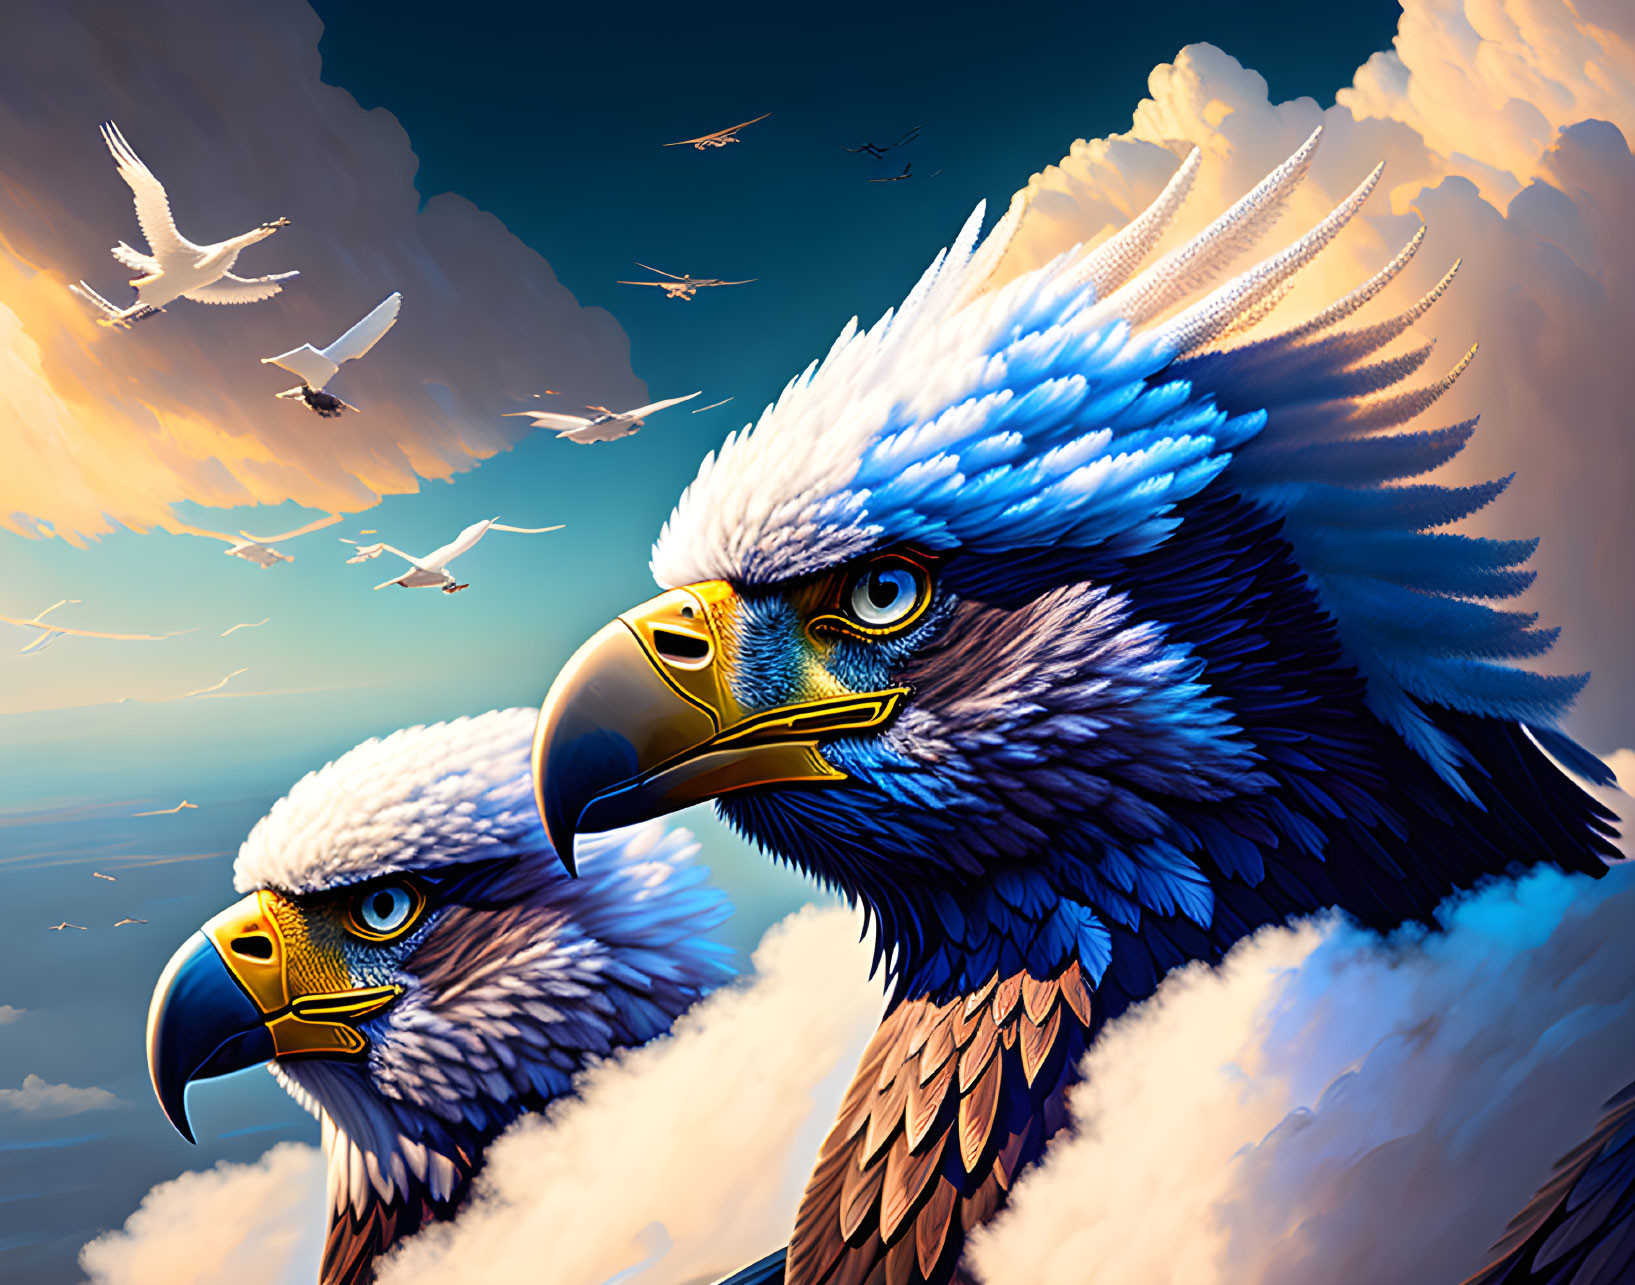 Stylized eagles with vibrant blue feathers soaring in sunset sky